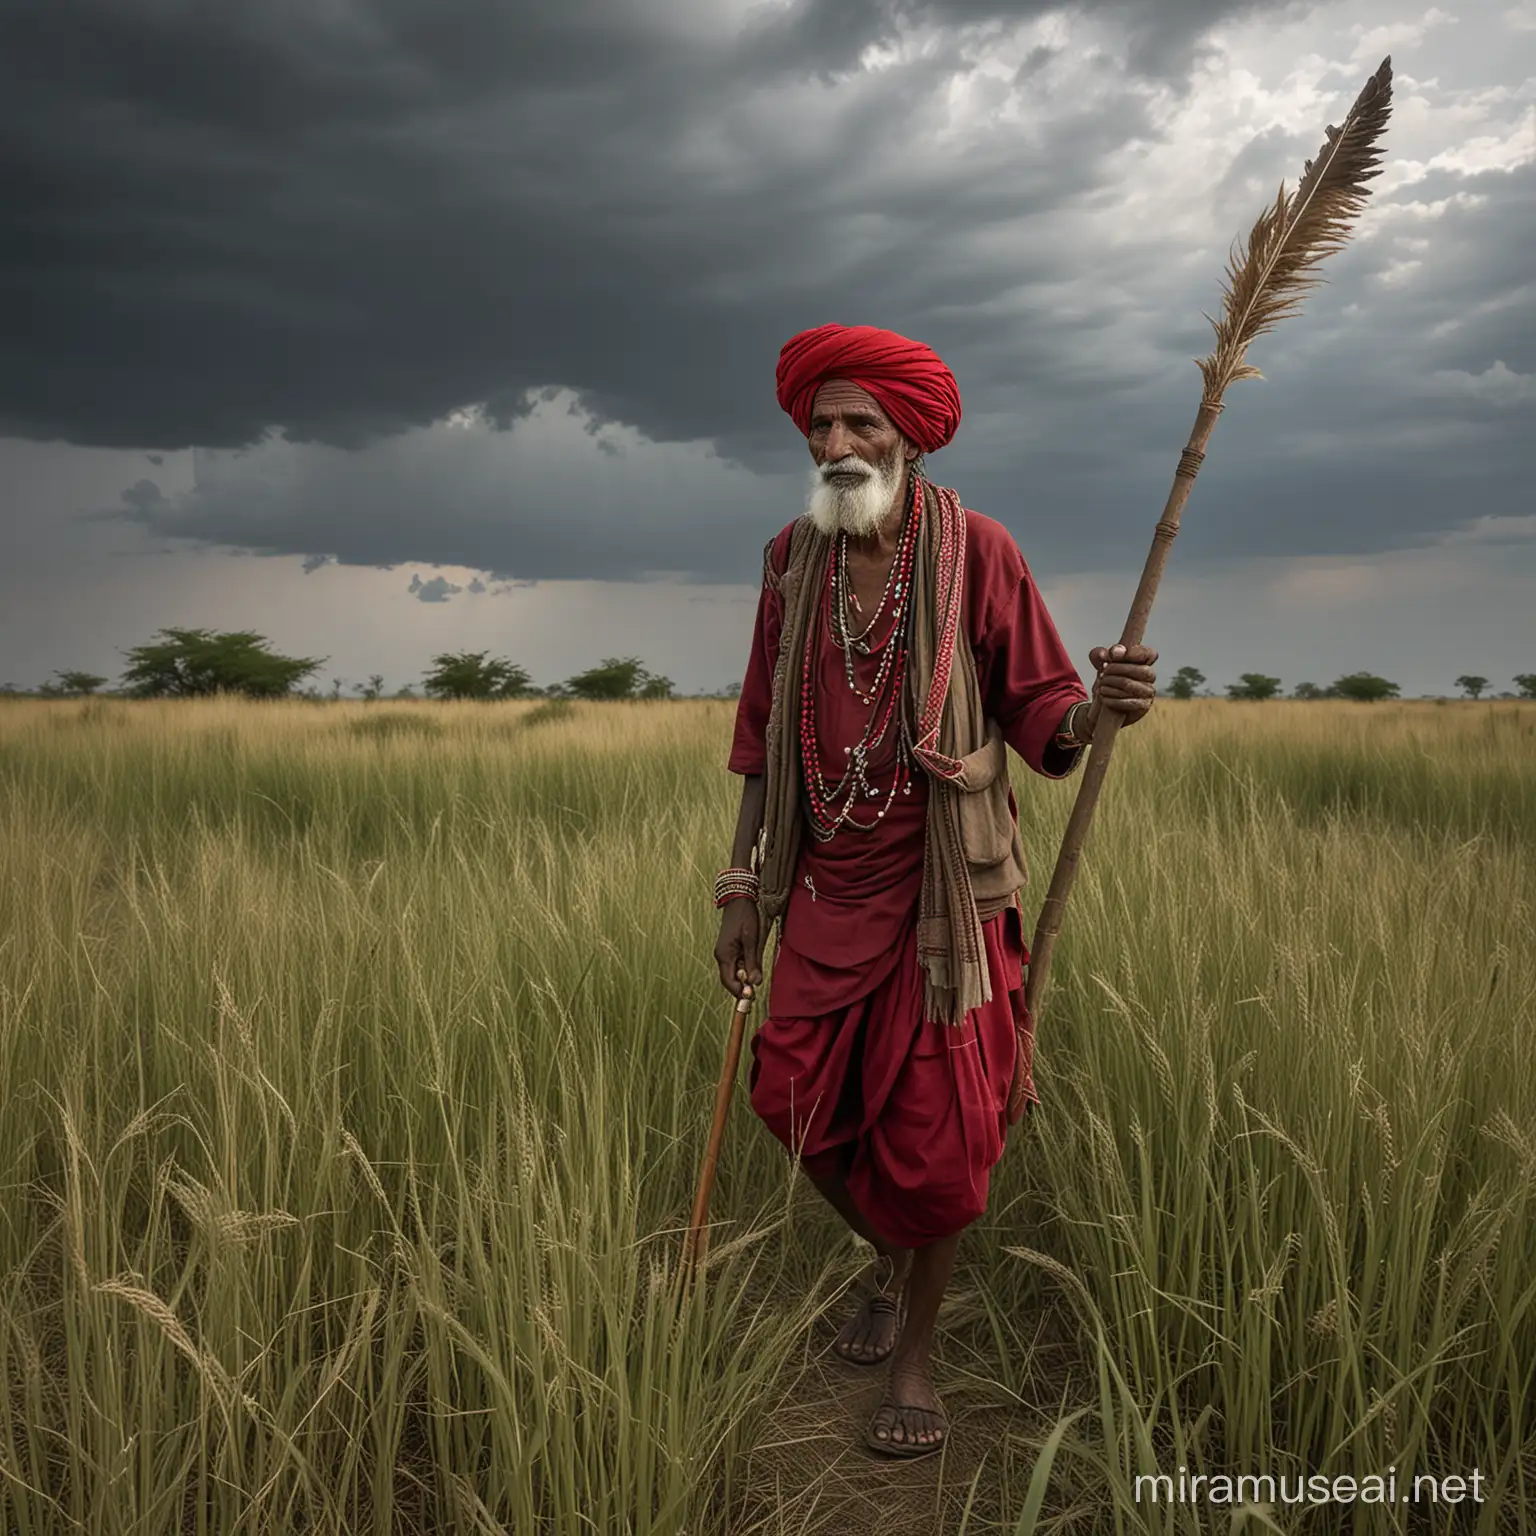 local thin rabari rajasthan eighty years old red turban  is walking trough  high grass  field whit stick in his hands by cloudy sky with a eagle in the sky fotorealistisch fuji xt3sky